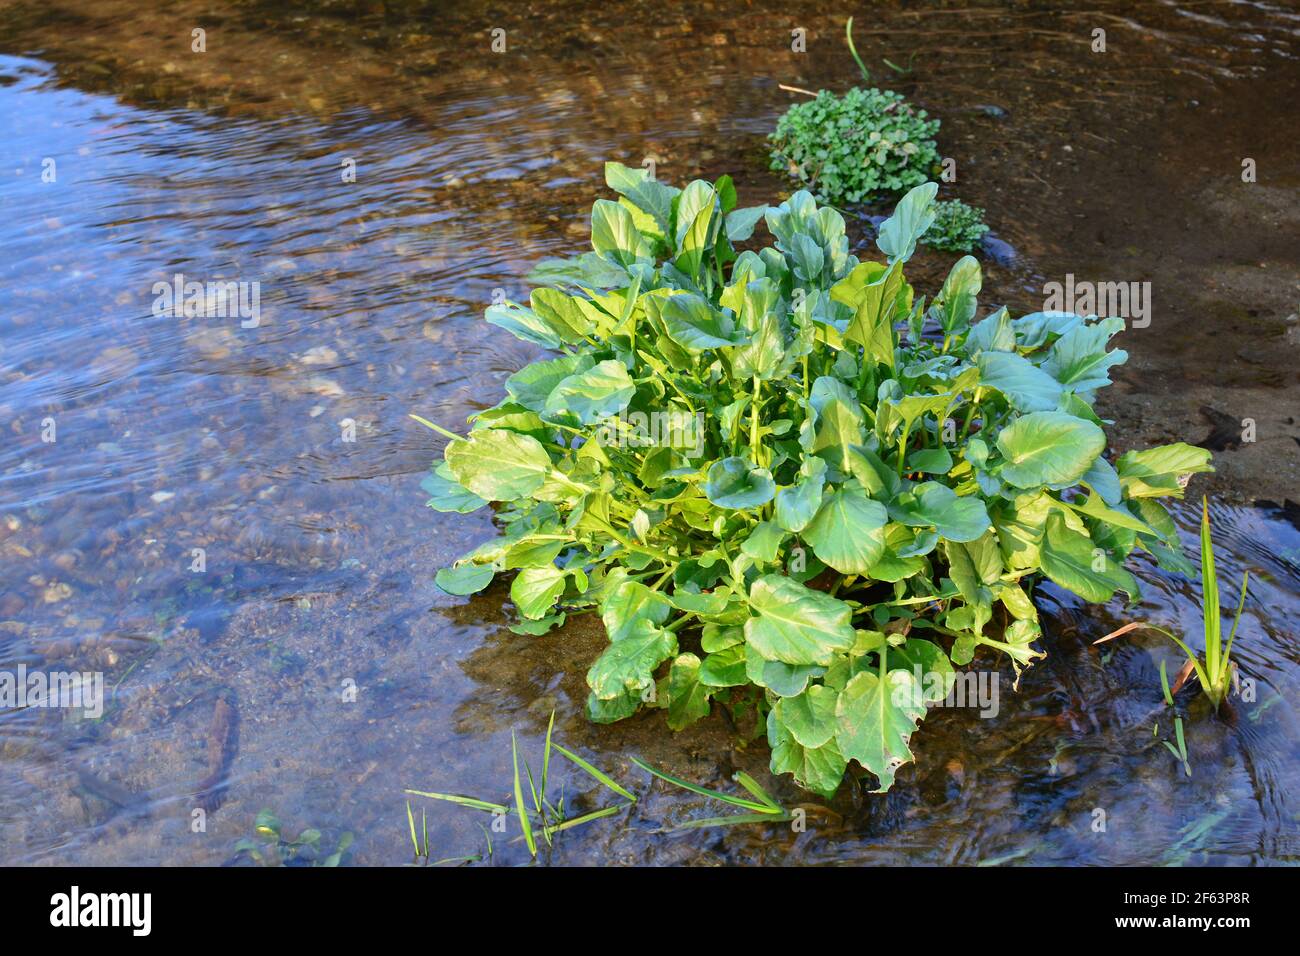 Ficaria verna, formerly Ranunculus ficaria, commonly known as lesser celandine or pilewort in shallow water of mountain creek in early spring Stock Photo